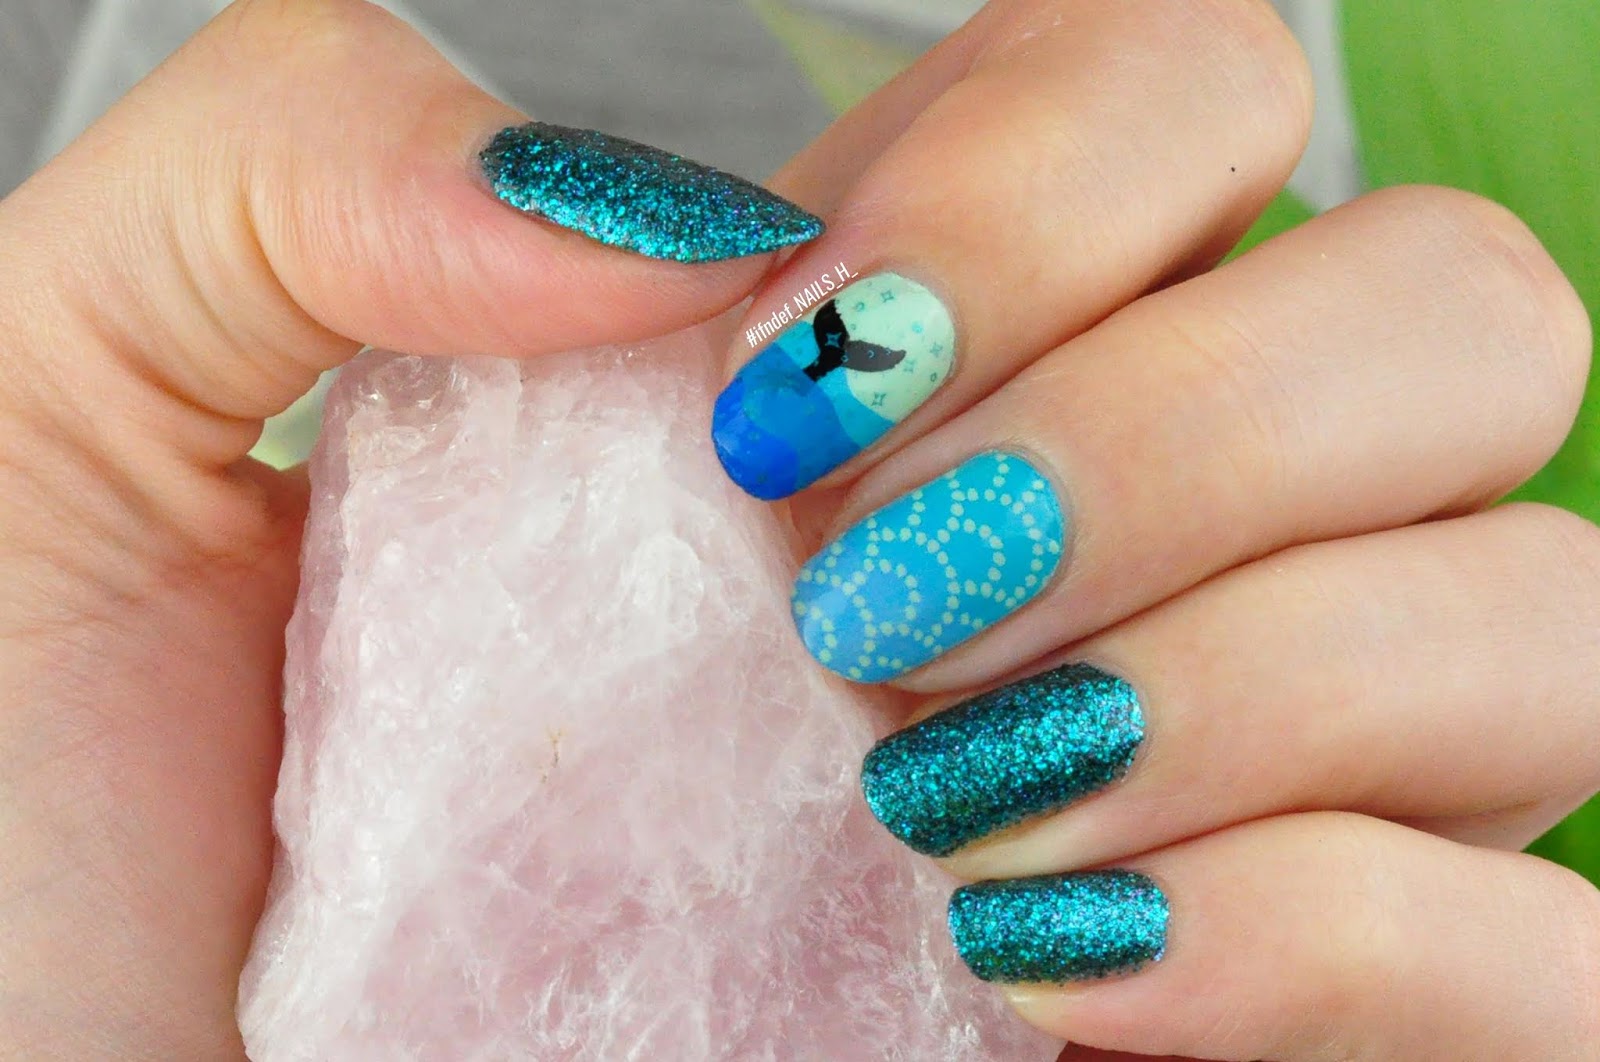 3. Pink and Blue Mermaid Scale Nails - wide 4